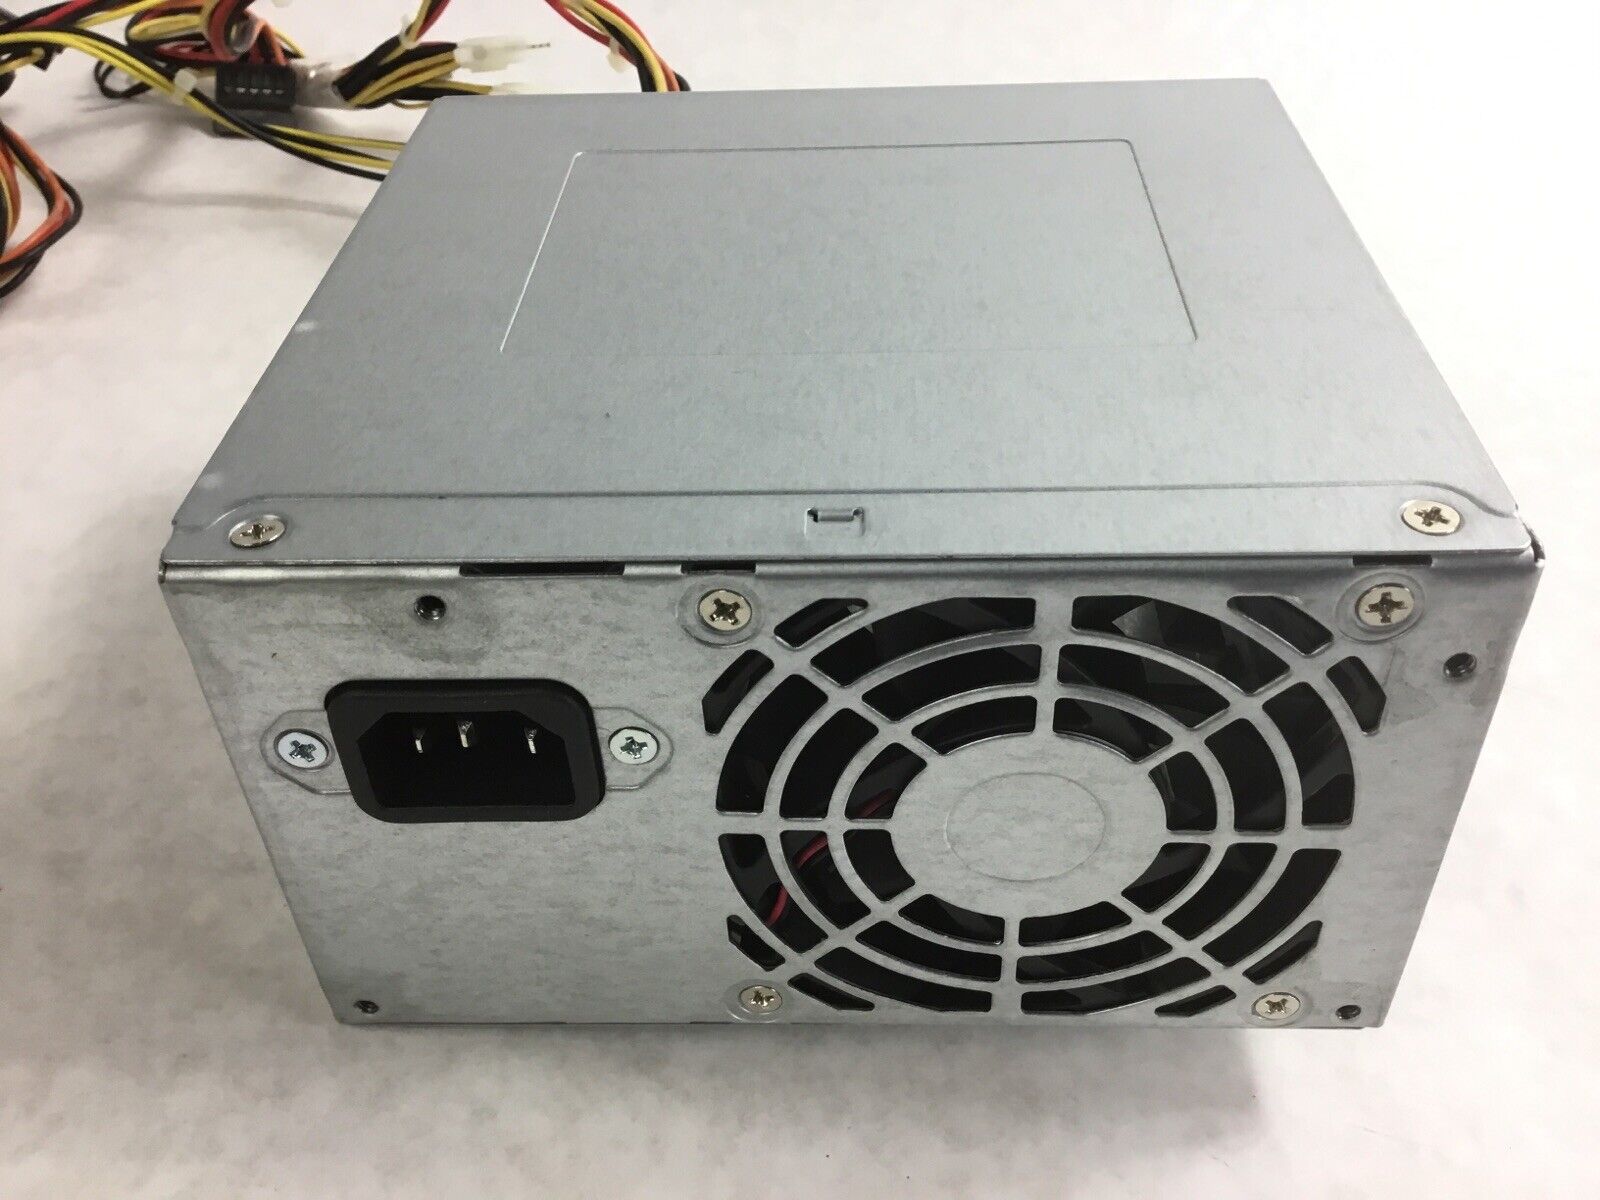 Delta Electronics Model DPS-250AB-92A 250 Max Power Supply PSU -Tested